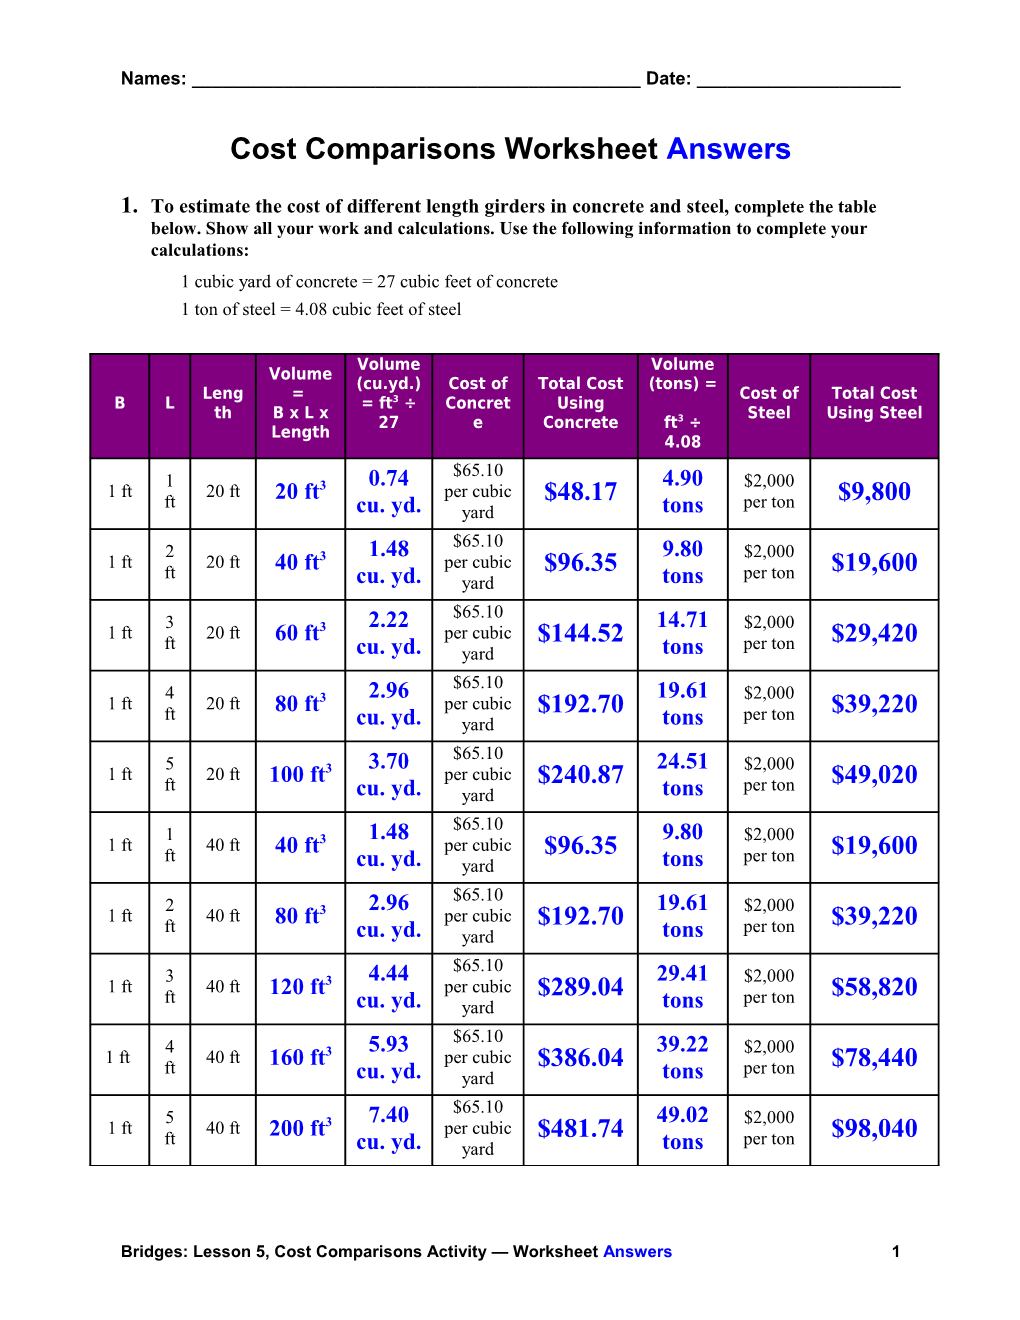 Cost Comparisons Worksheet Answers